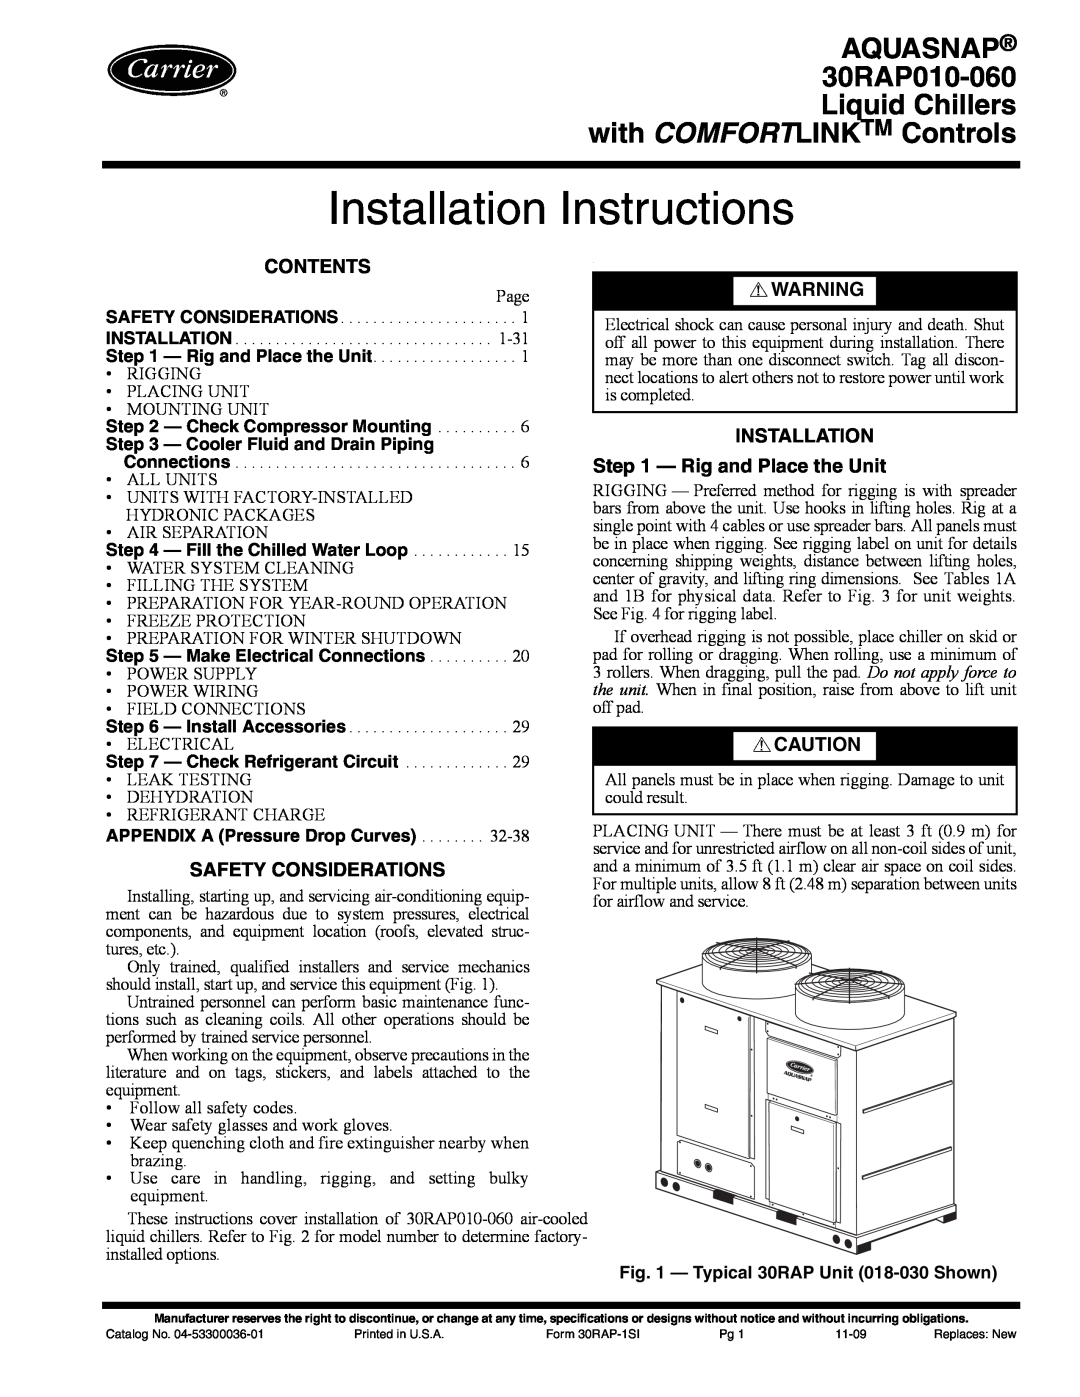 Carrier 30RAP010-060 installation instructions Contents, Safety Considerations, INSTALLATION - Rig and Place the Unit 